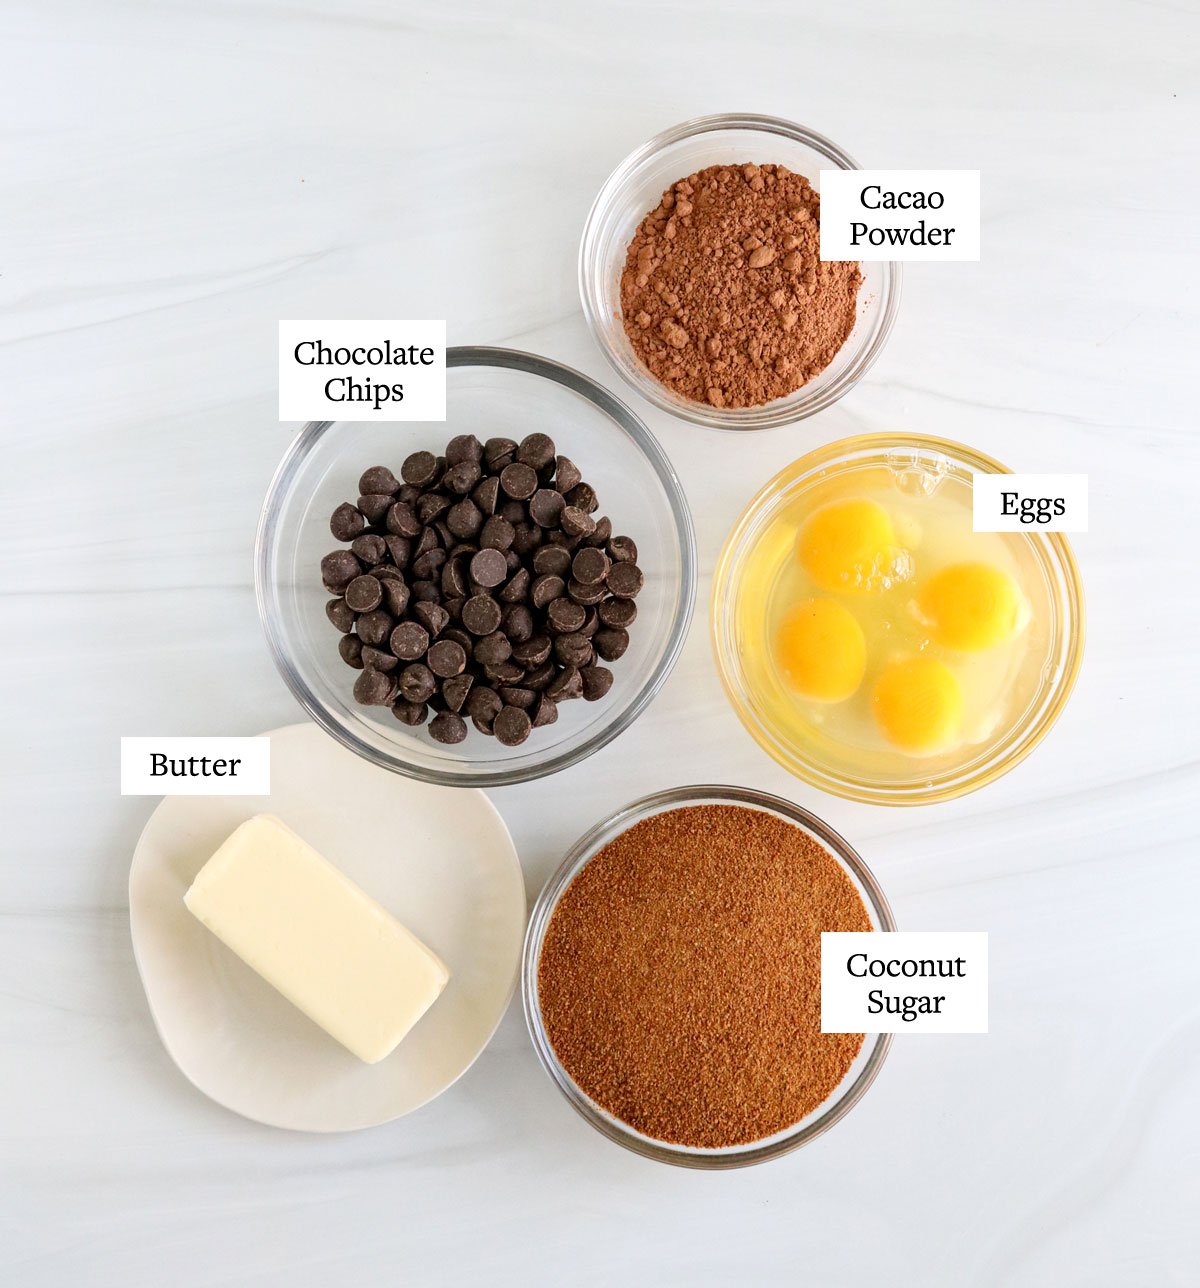 flourless chocolate cake ingredients labeled on white surface.